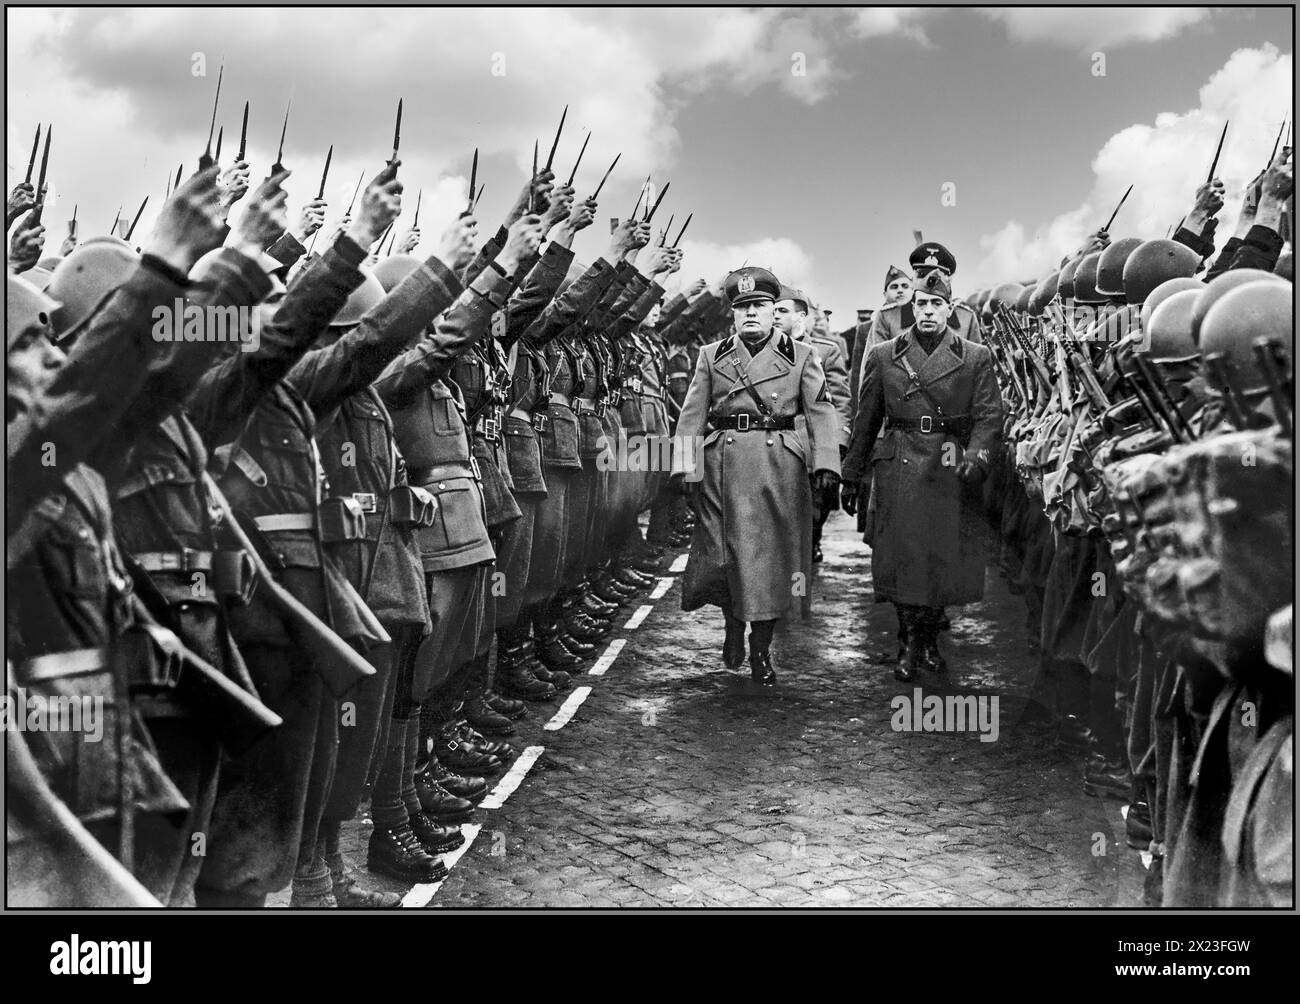 Benito Mussolini Il Duce inspects the Italian Fascist Militia on the occasion of their 19th anniversary. The 19th day of the Fascist Militia was the first day of February 1942 in Rome, with its debut as a solemn tribute to the fallen Blackshirts in Italy. Rome Italy Stock Photo